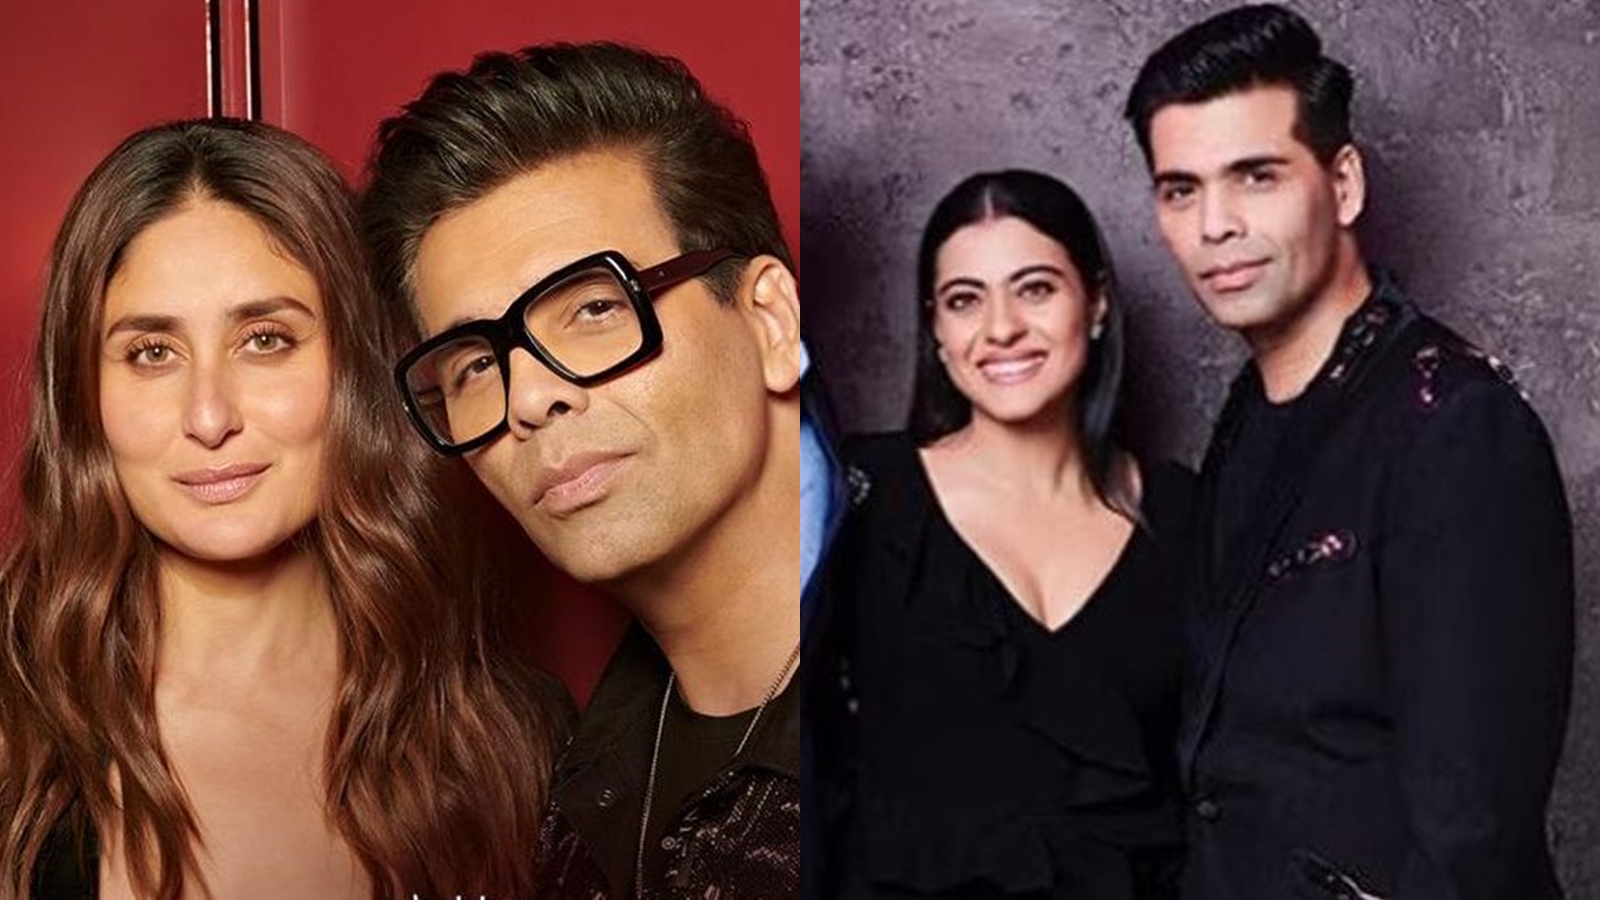 Kajol Ke Xxx Video - Karan Johar recalls time when he stopped speaking to Kareena Kapoor, how he  ended fued with Kajol: 'After my dad was diagnosed with cancerâ€¦' |  Bollywood News - The Indian Express